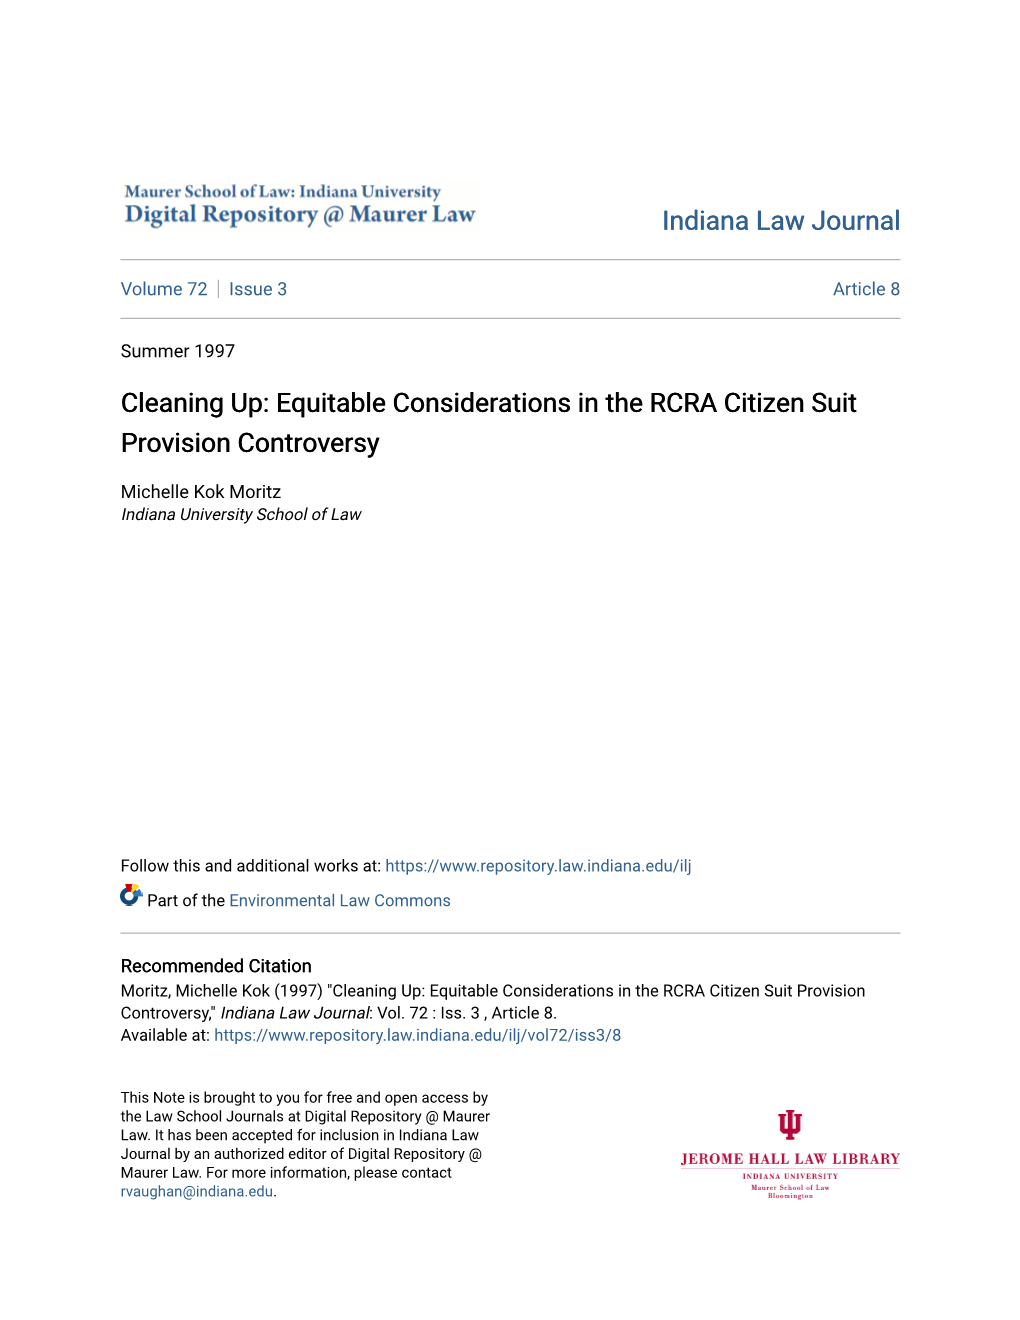 Equitable Considerations in the RCRA Citizen Suit Provision Controversy